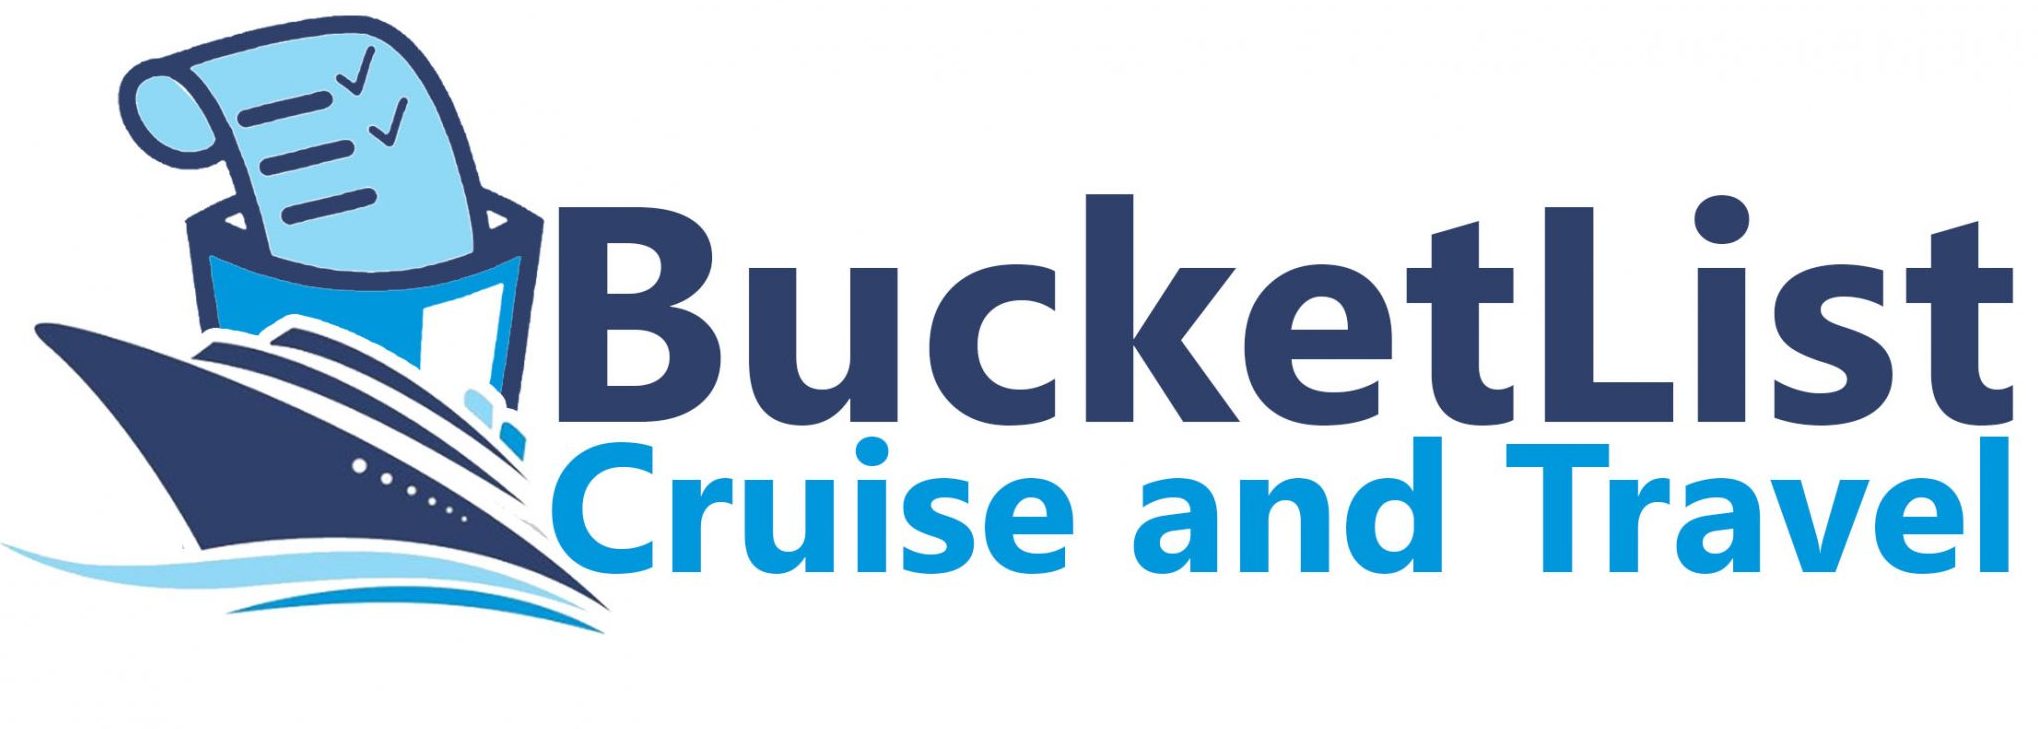 Bucket List Cruise and Travel